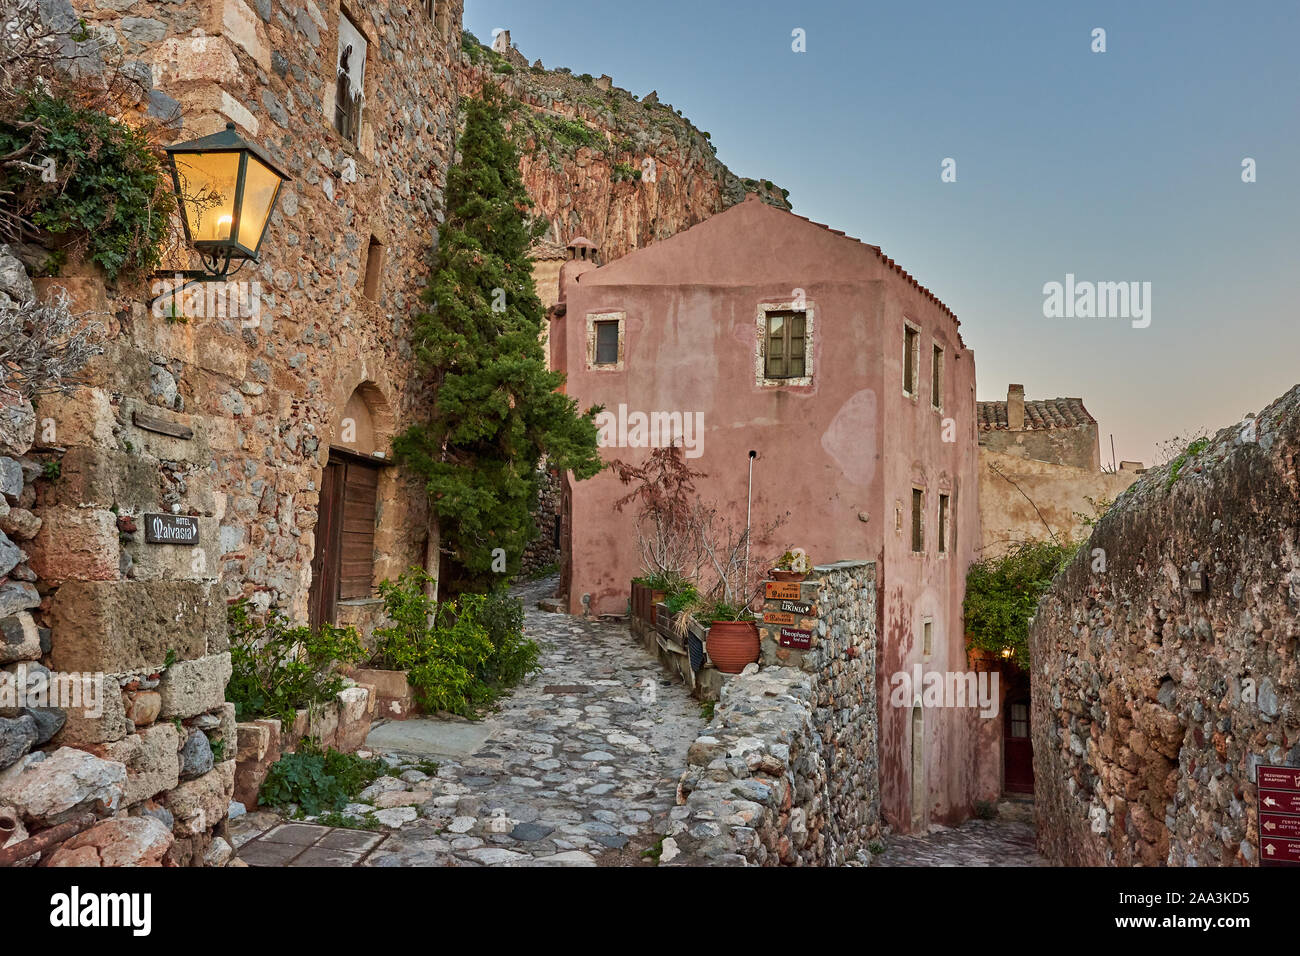 Stone alley into the picturesque castle town of Monemvasia during winter. Architectural stone buildings and beautiful narrow paved streets Stock Photo